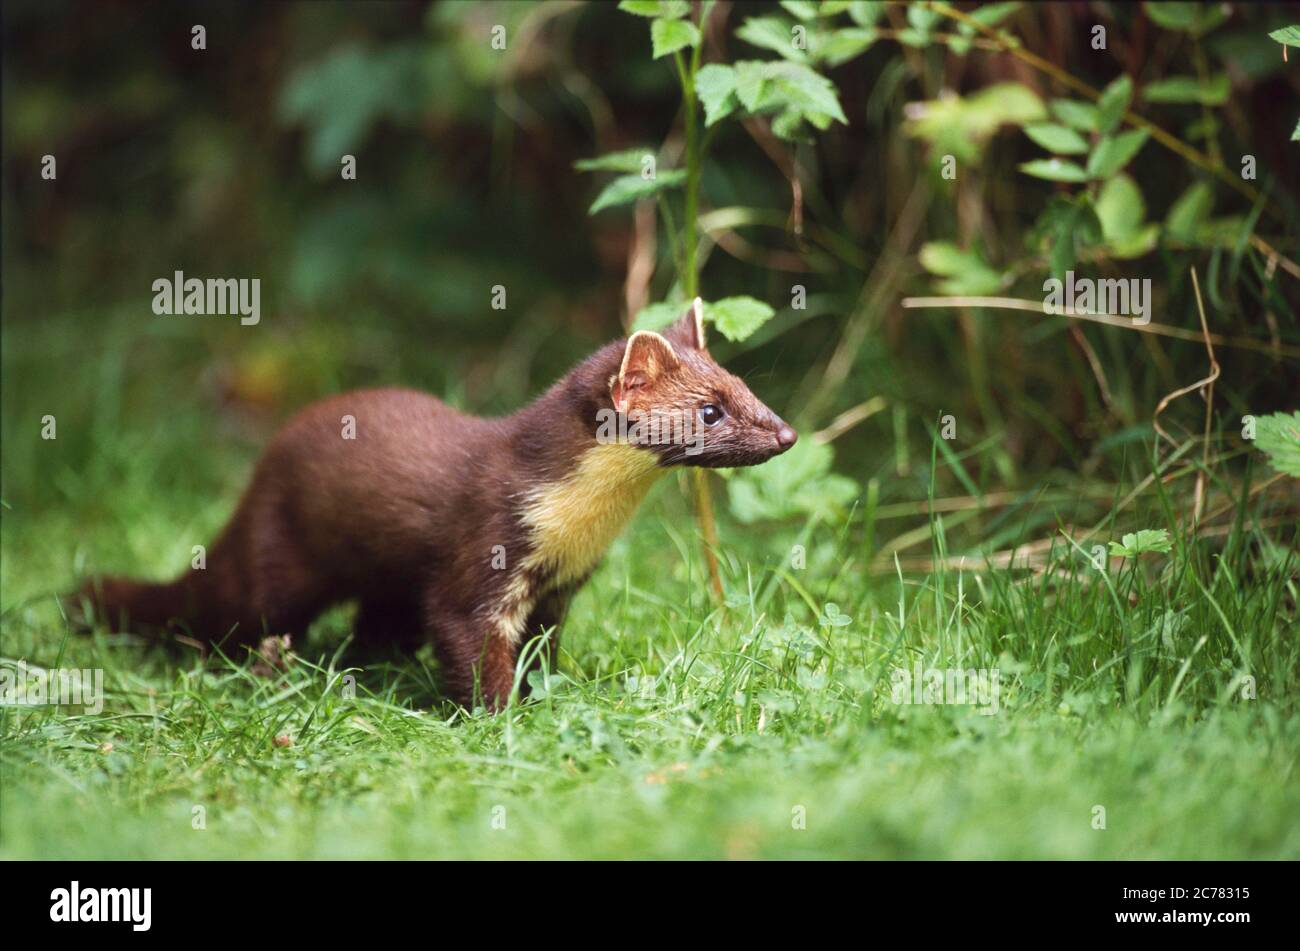 European Pine Marten (Martes martes). Adult standing in grass. Germany Stock Photo